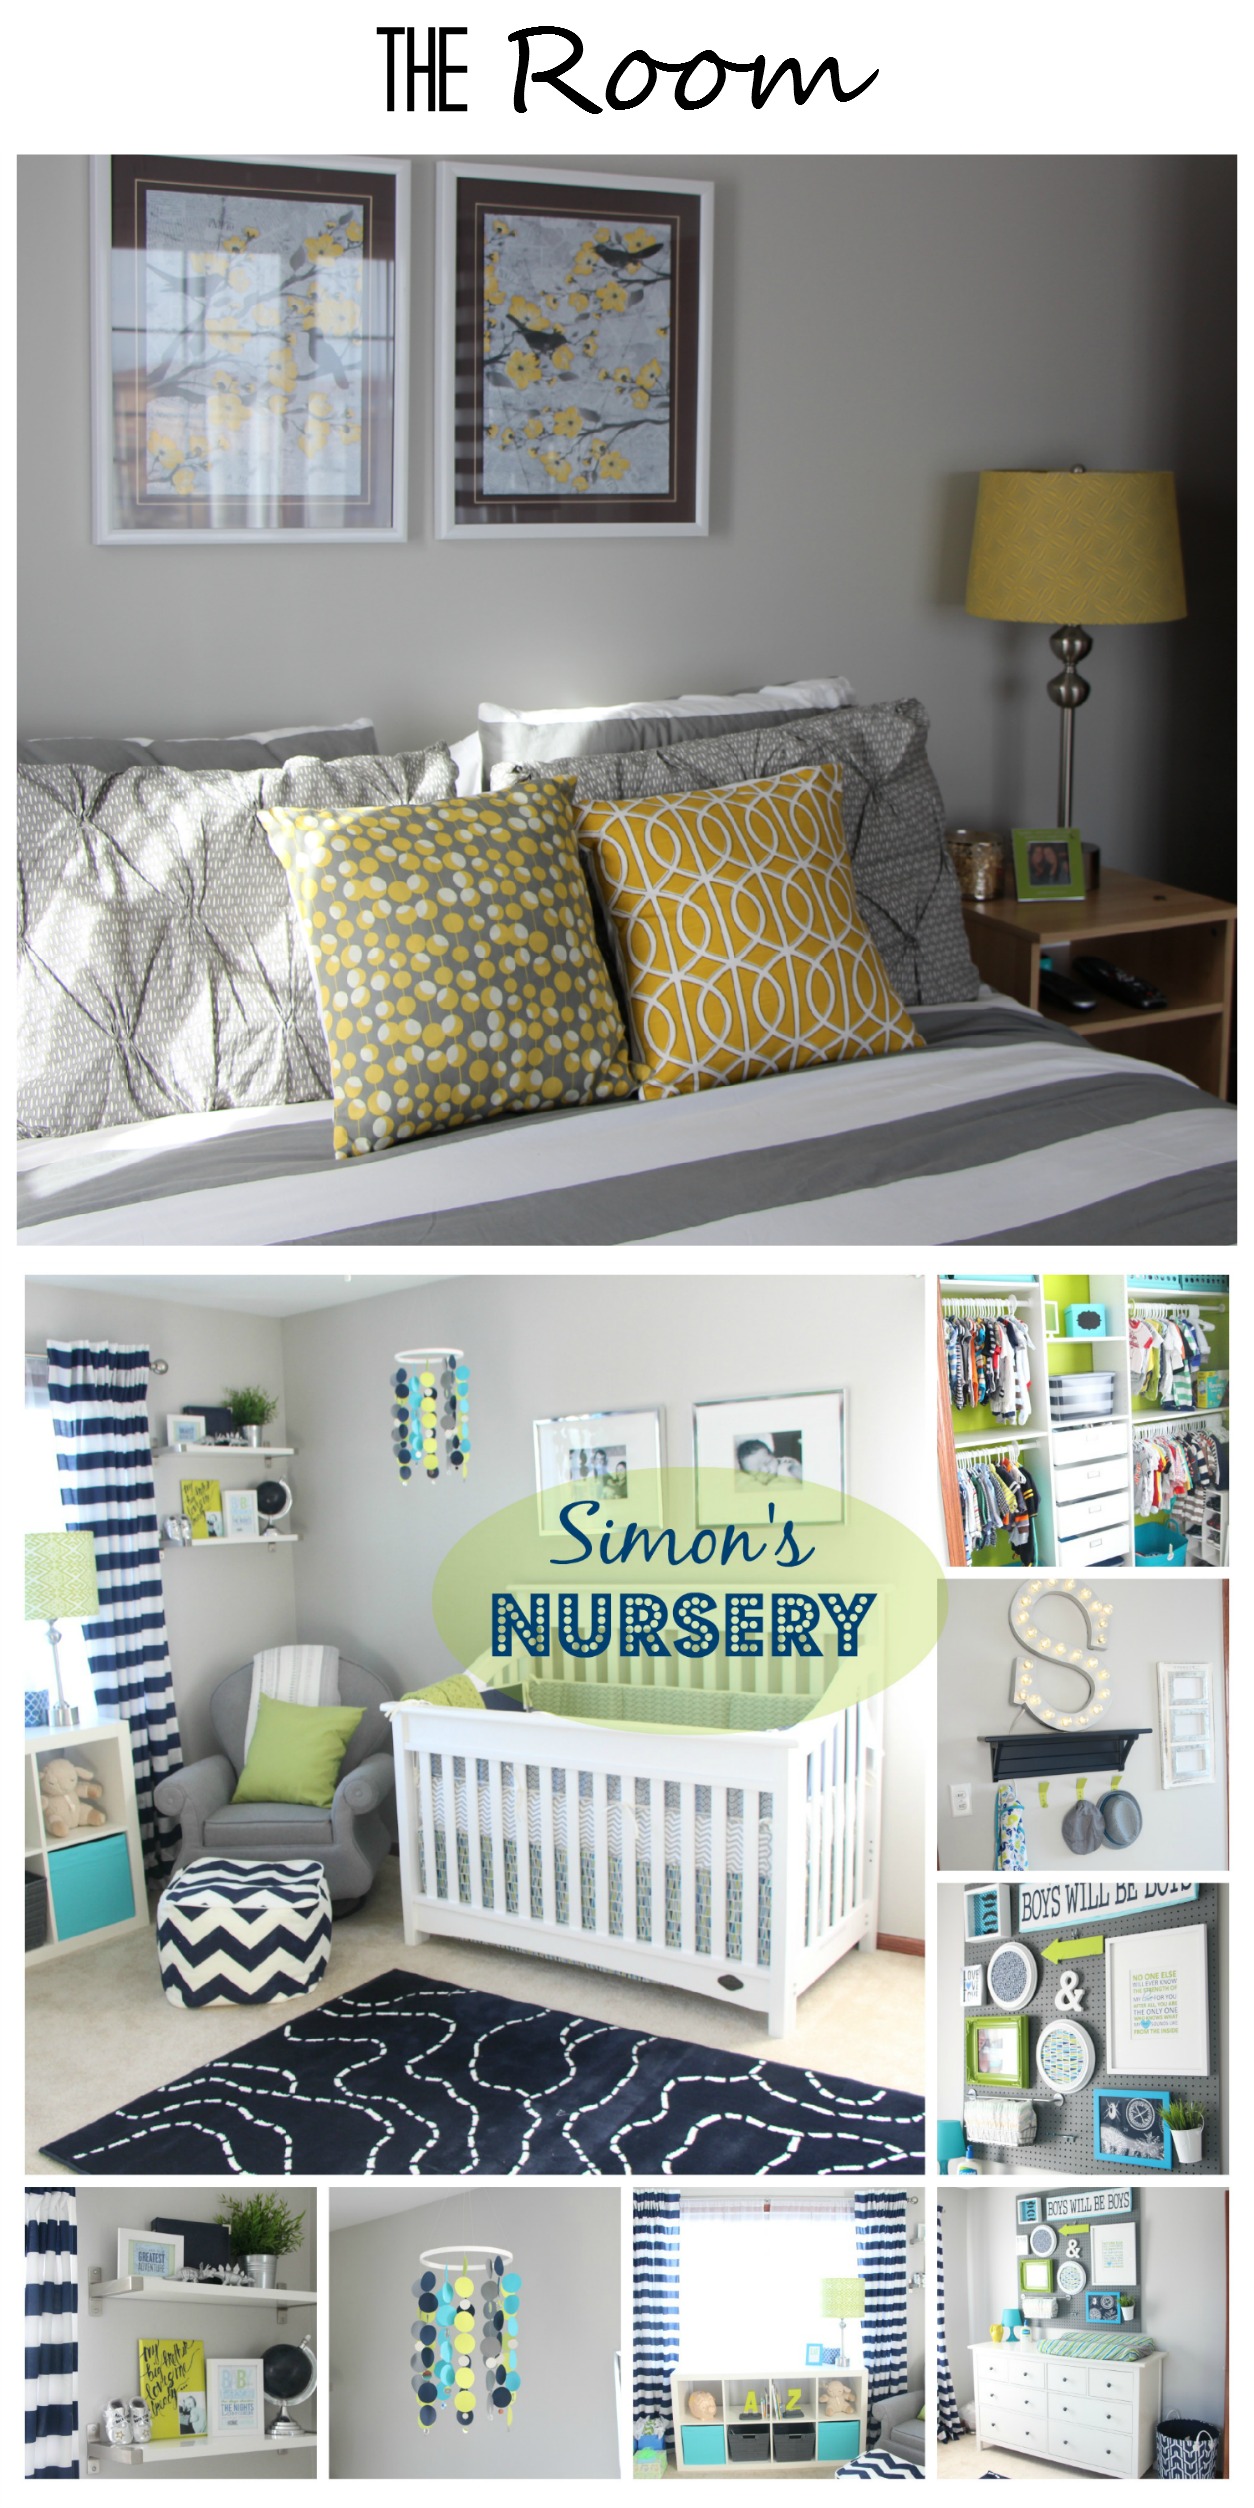 Nursery before and after